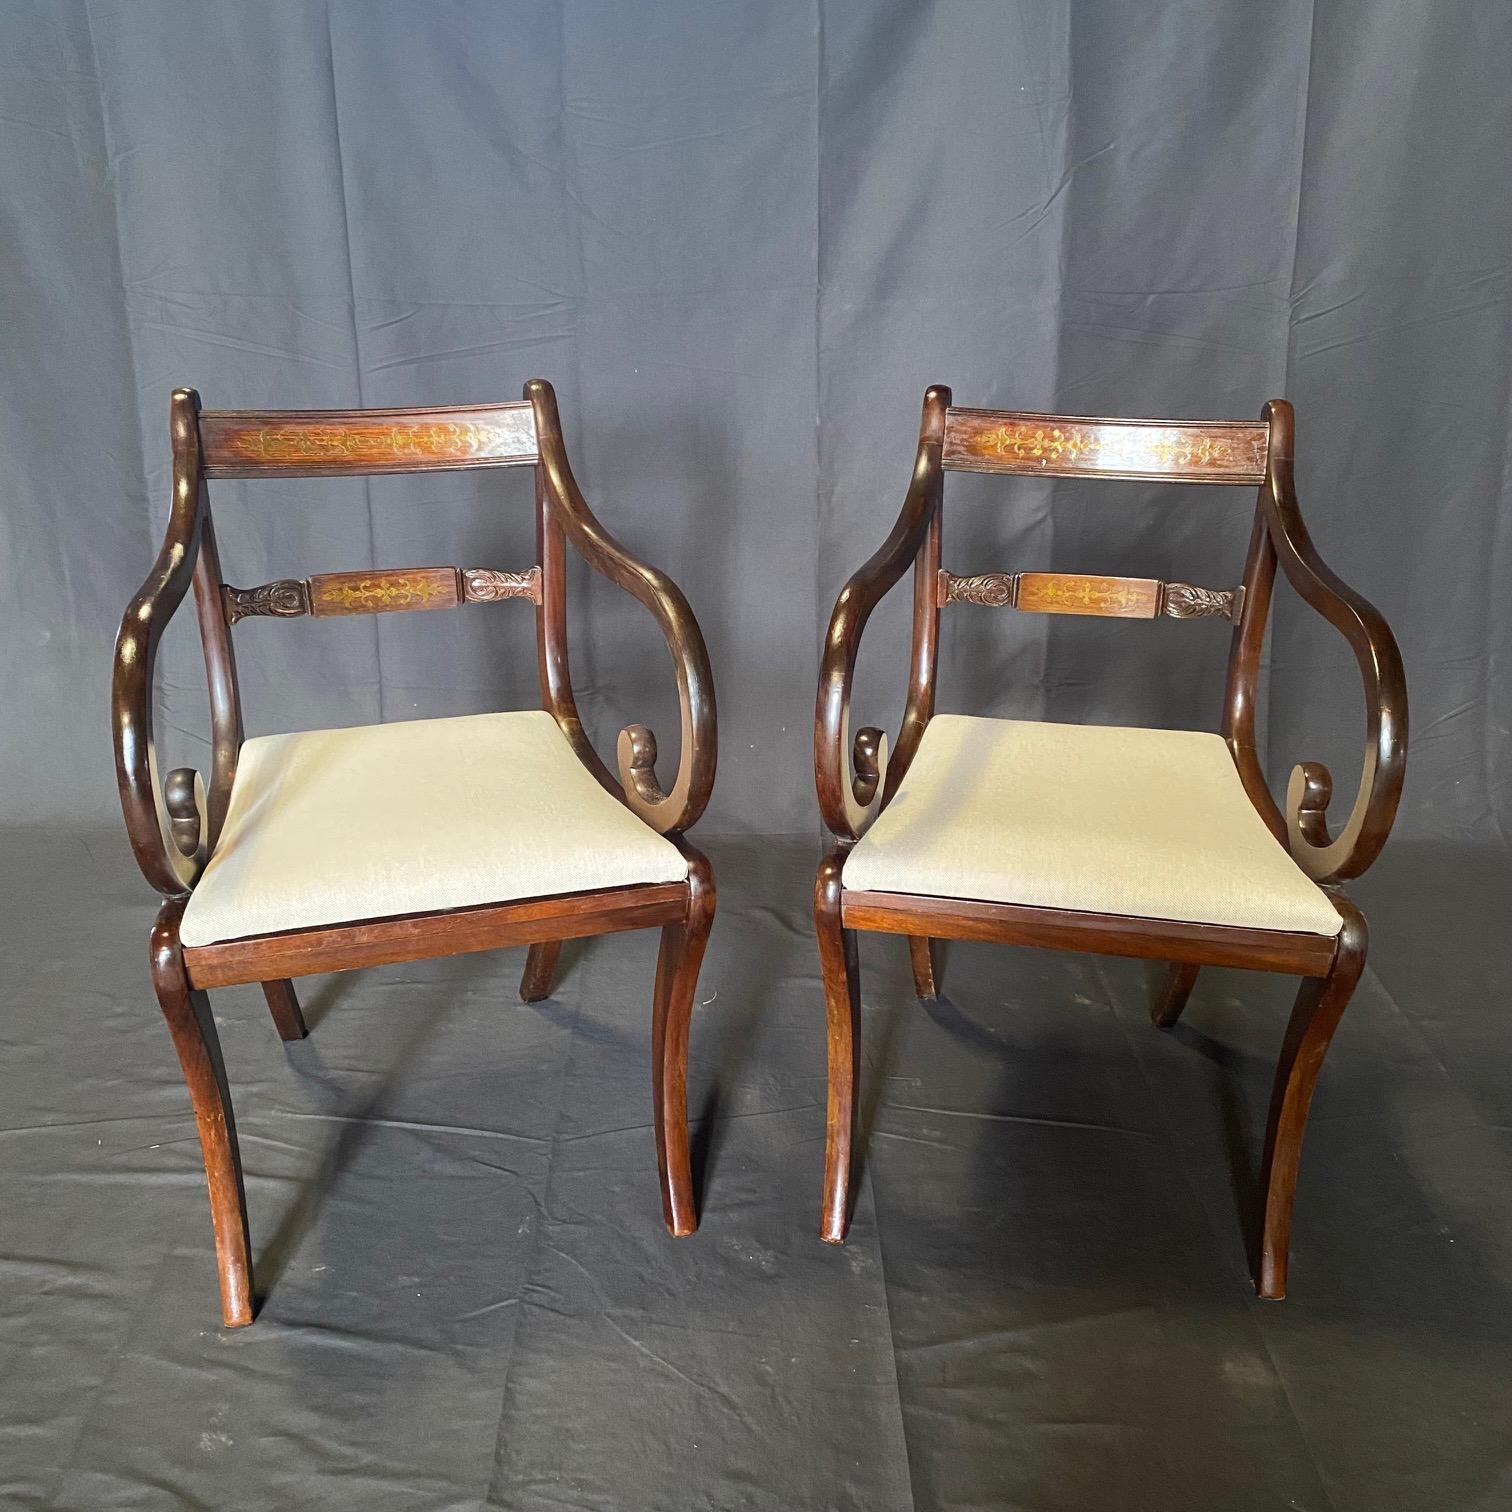 A superb British set of six brass inlaid Regency Revival dining chairs, of well-shaped Klismos outline, dating from the early 20th century. These chairs have been masterfully hand crafted with decorative brass inlay to the backs in beautiful solid